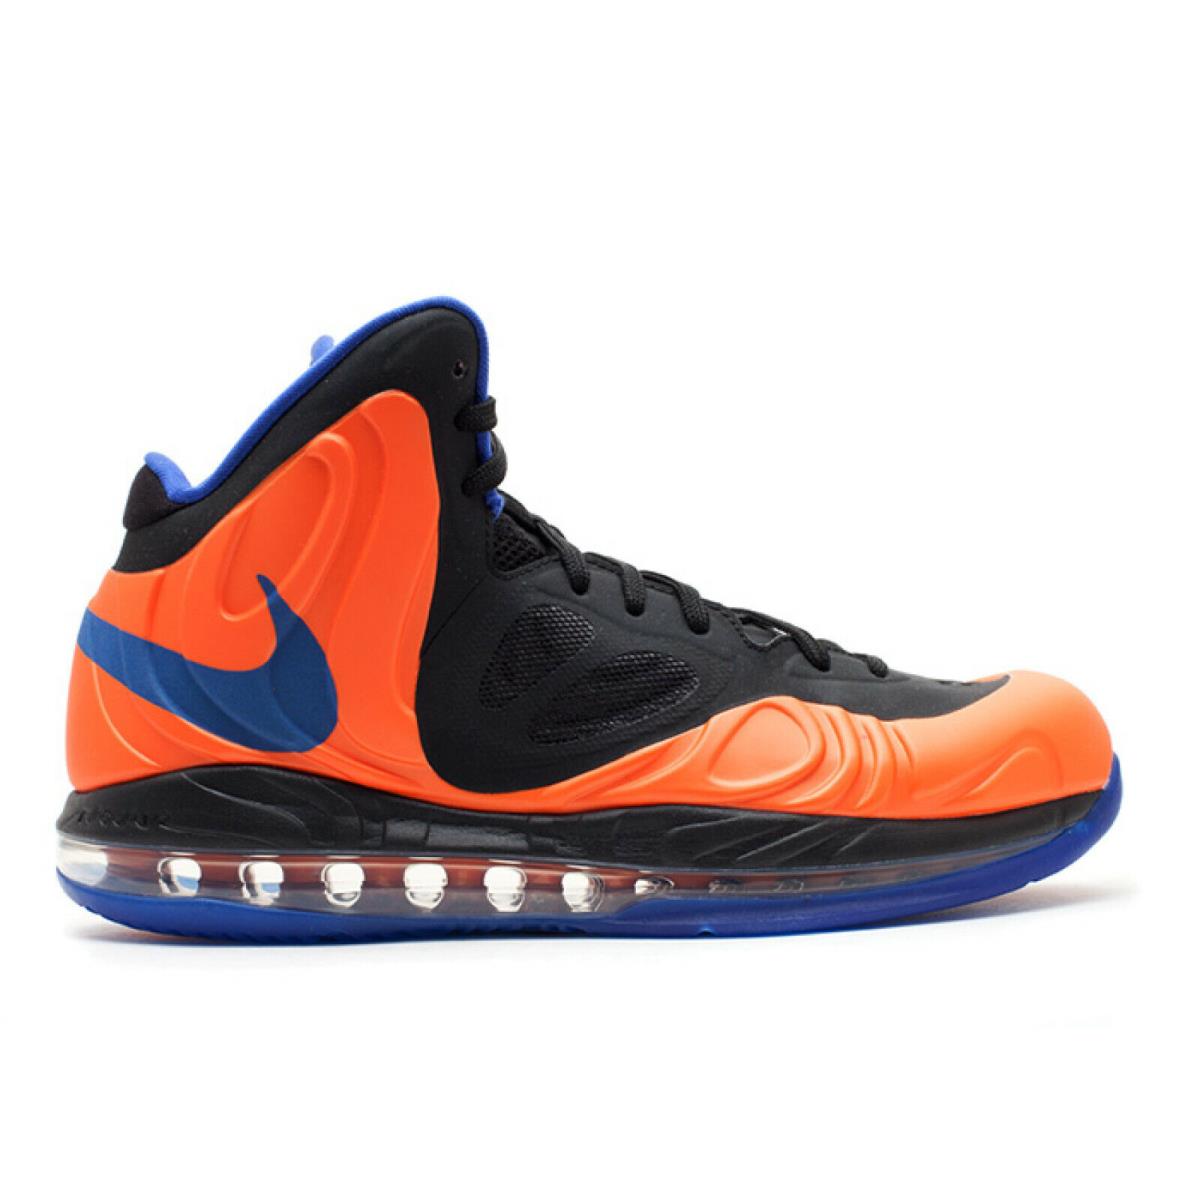 Nike Air Max Hyperposite Amare Stoudemire Stat Knicks Nyc 524862-800